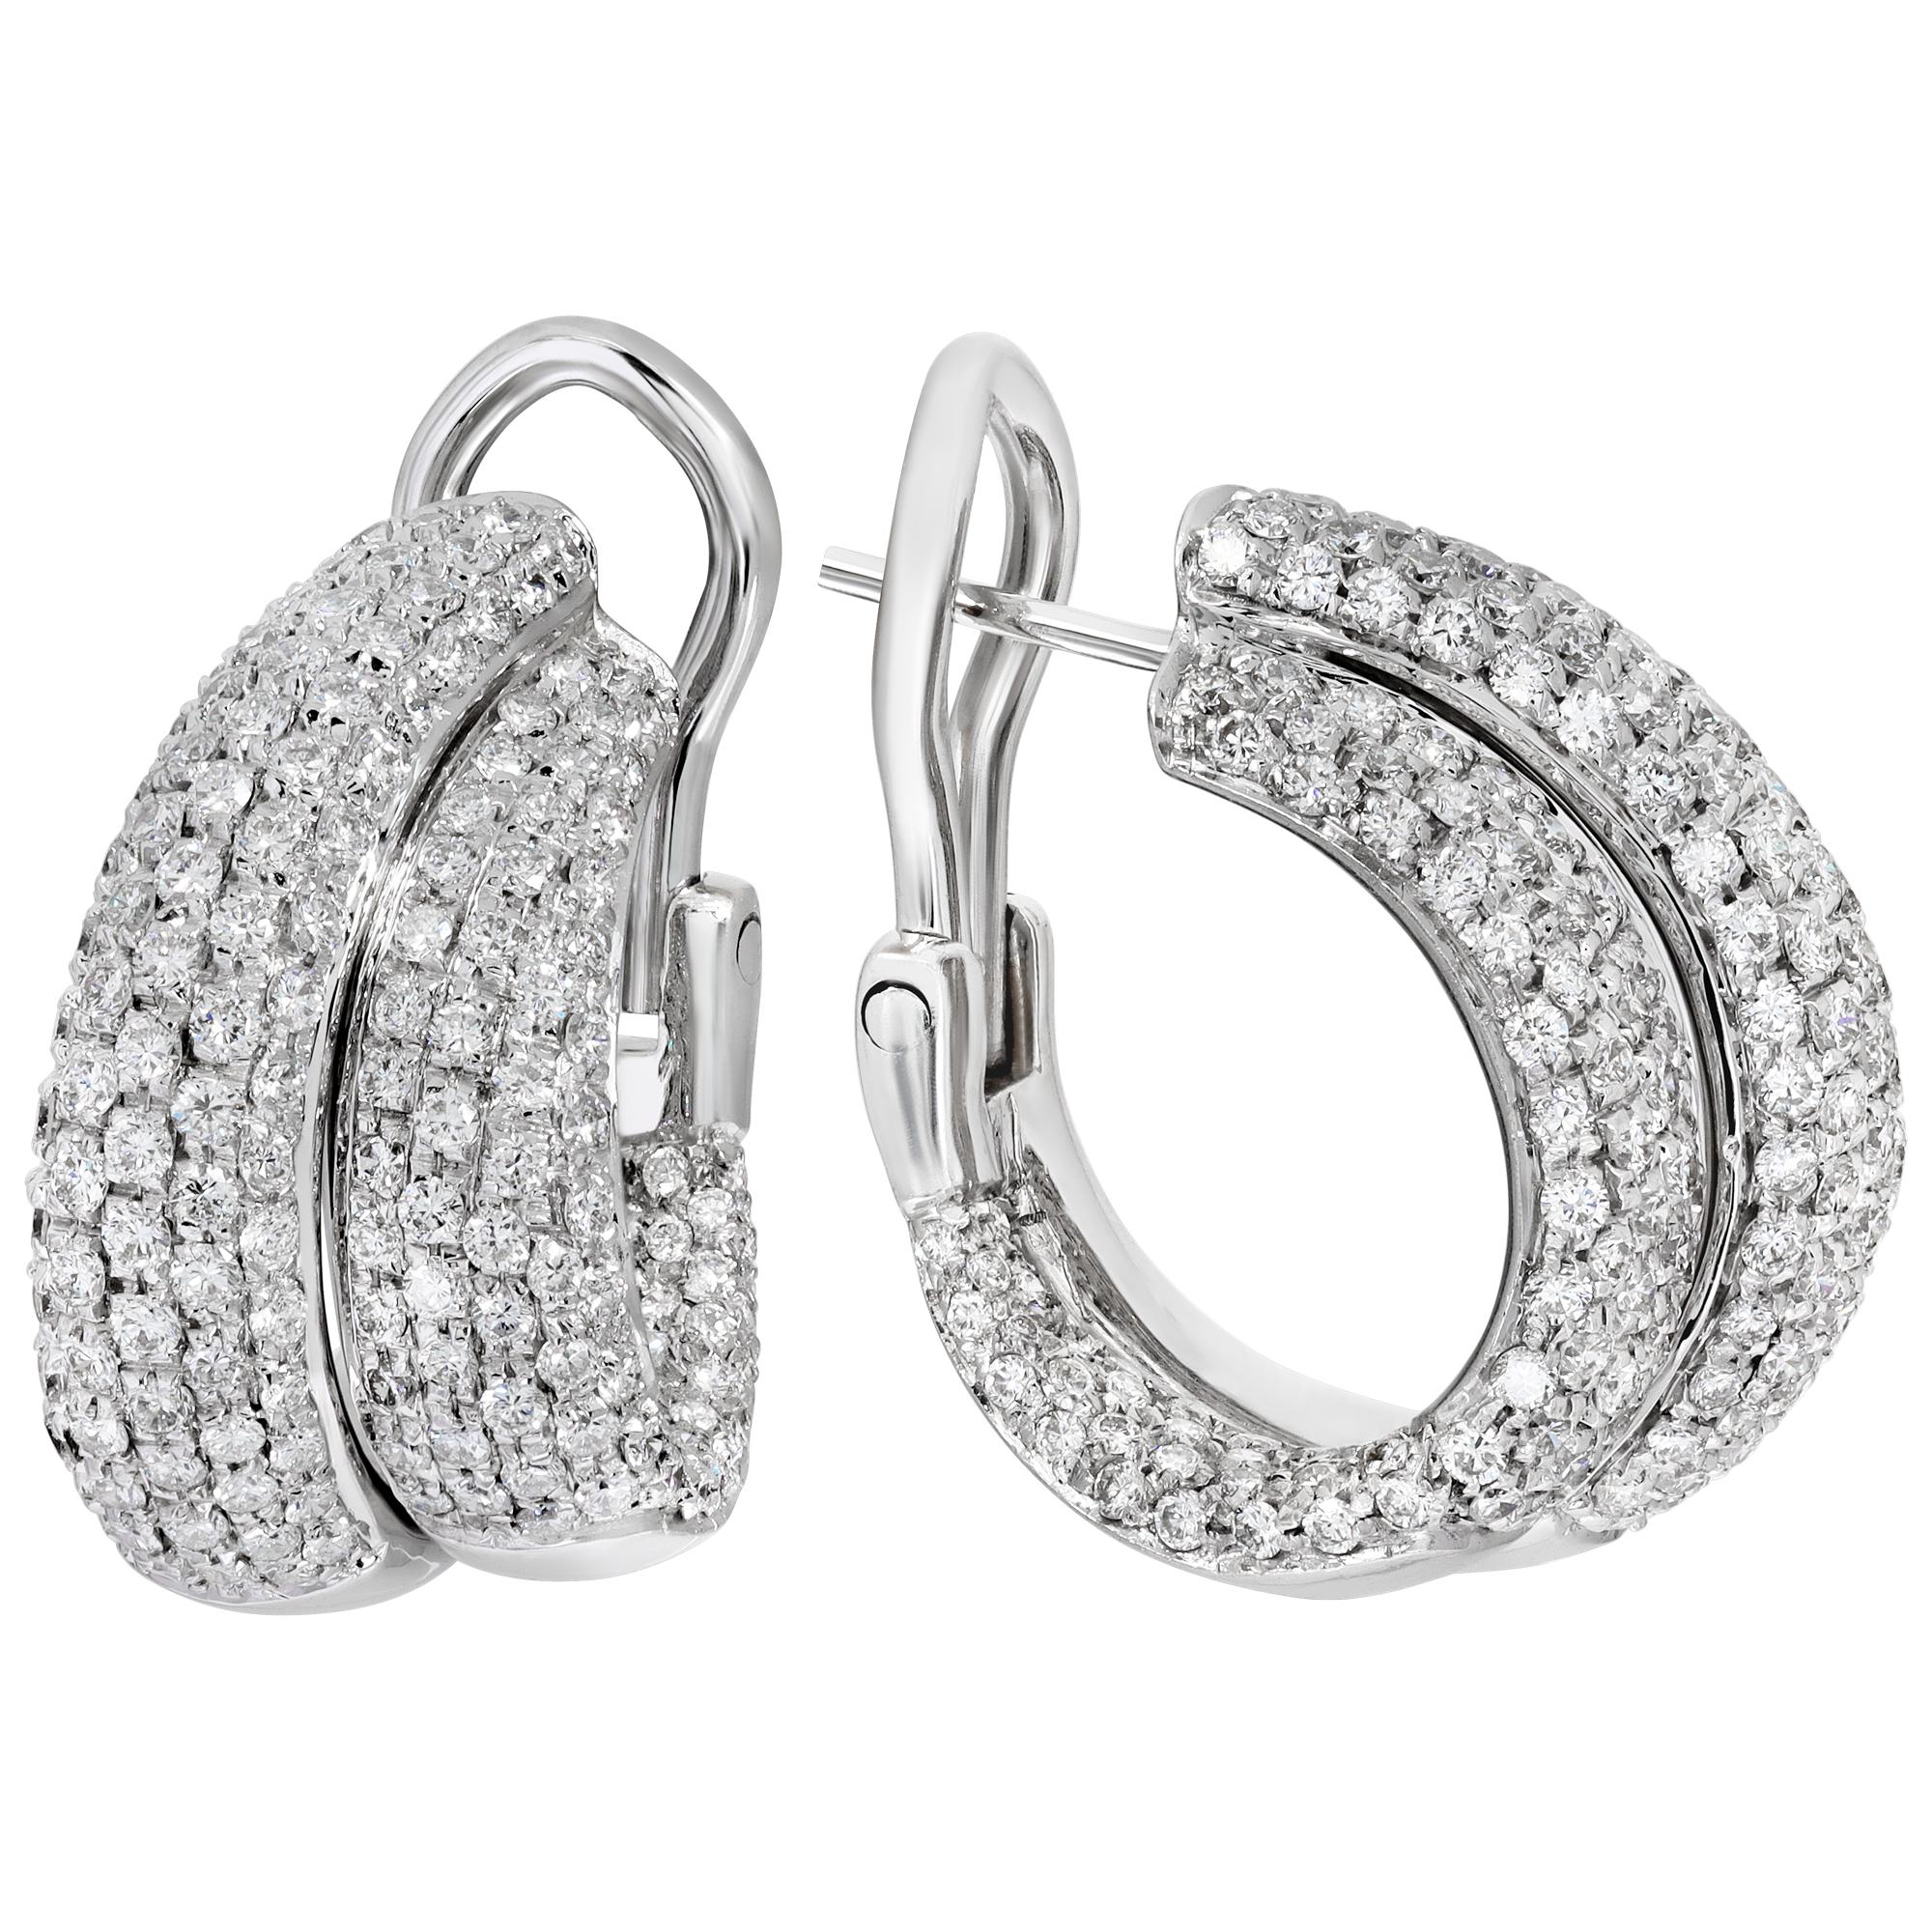 Double row of diamond 18K white gold hoop earrings In Excellent Condition For Sale In Surfside, FL